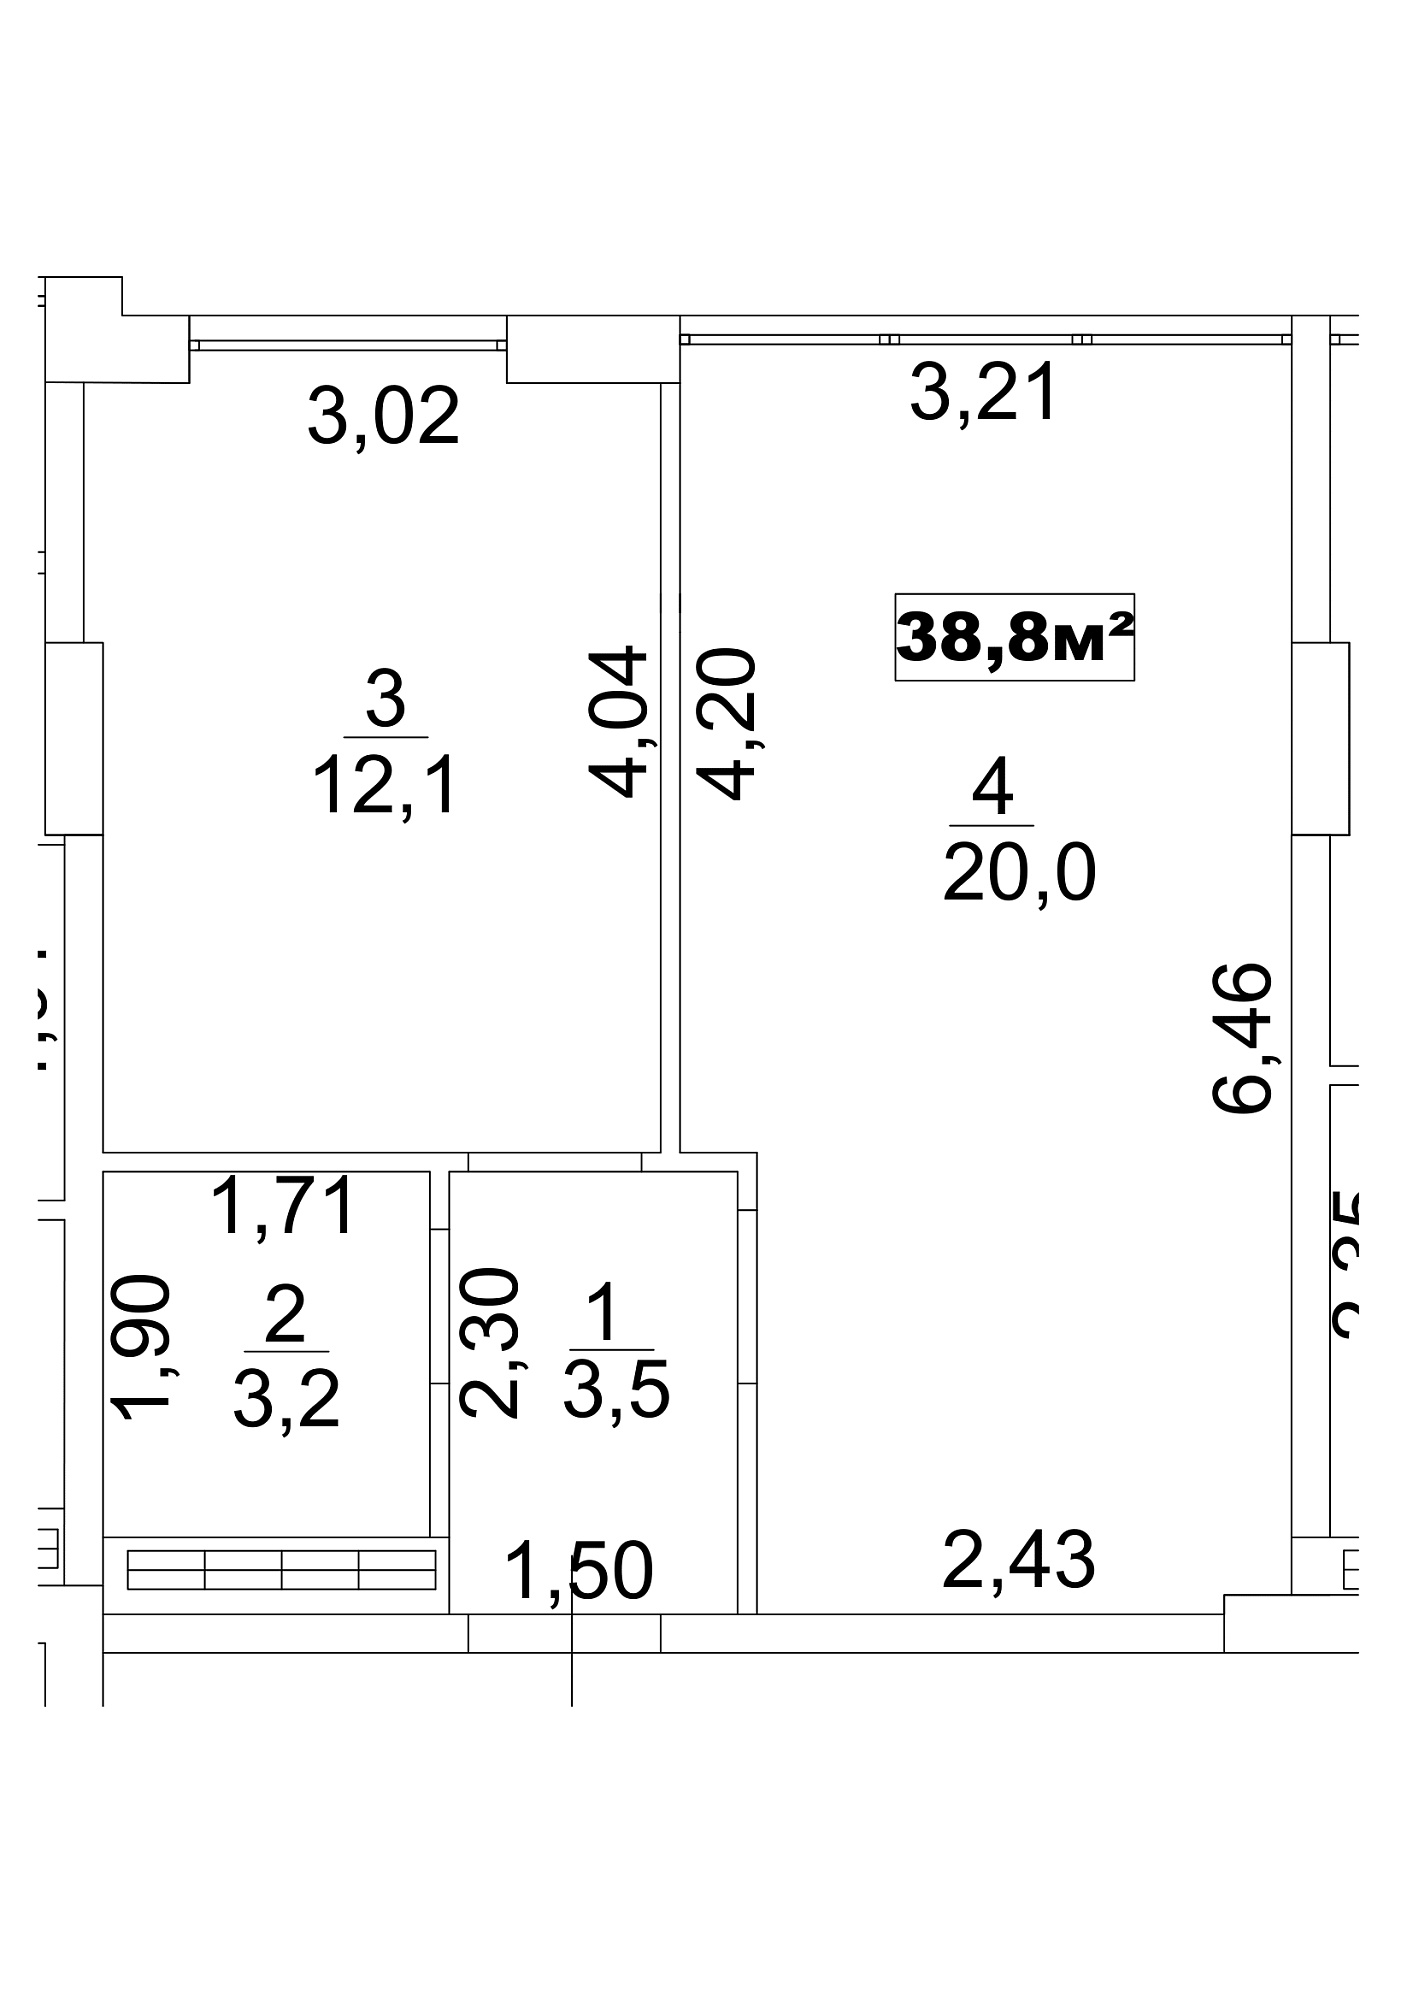 Planning 1-rm flats area 38.8m2, AB-13-08/00066.